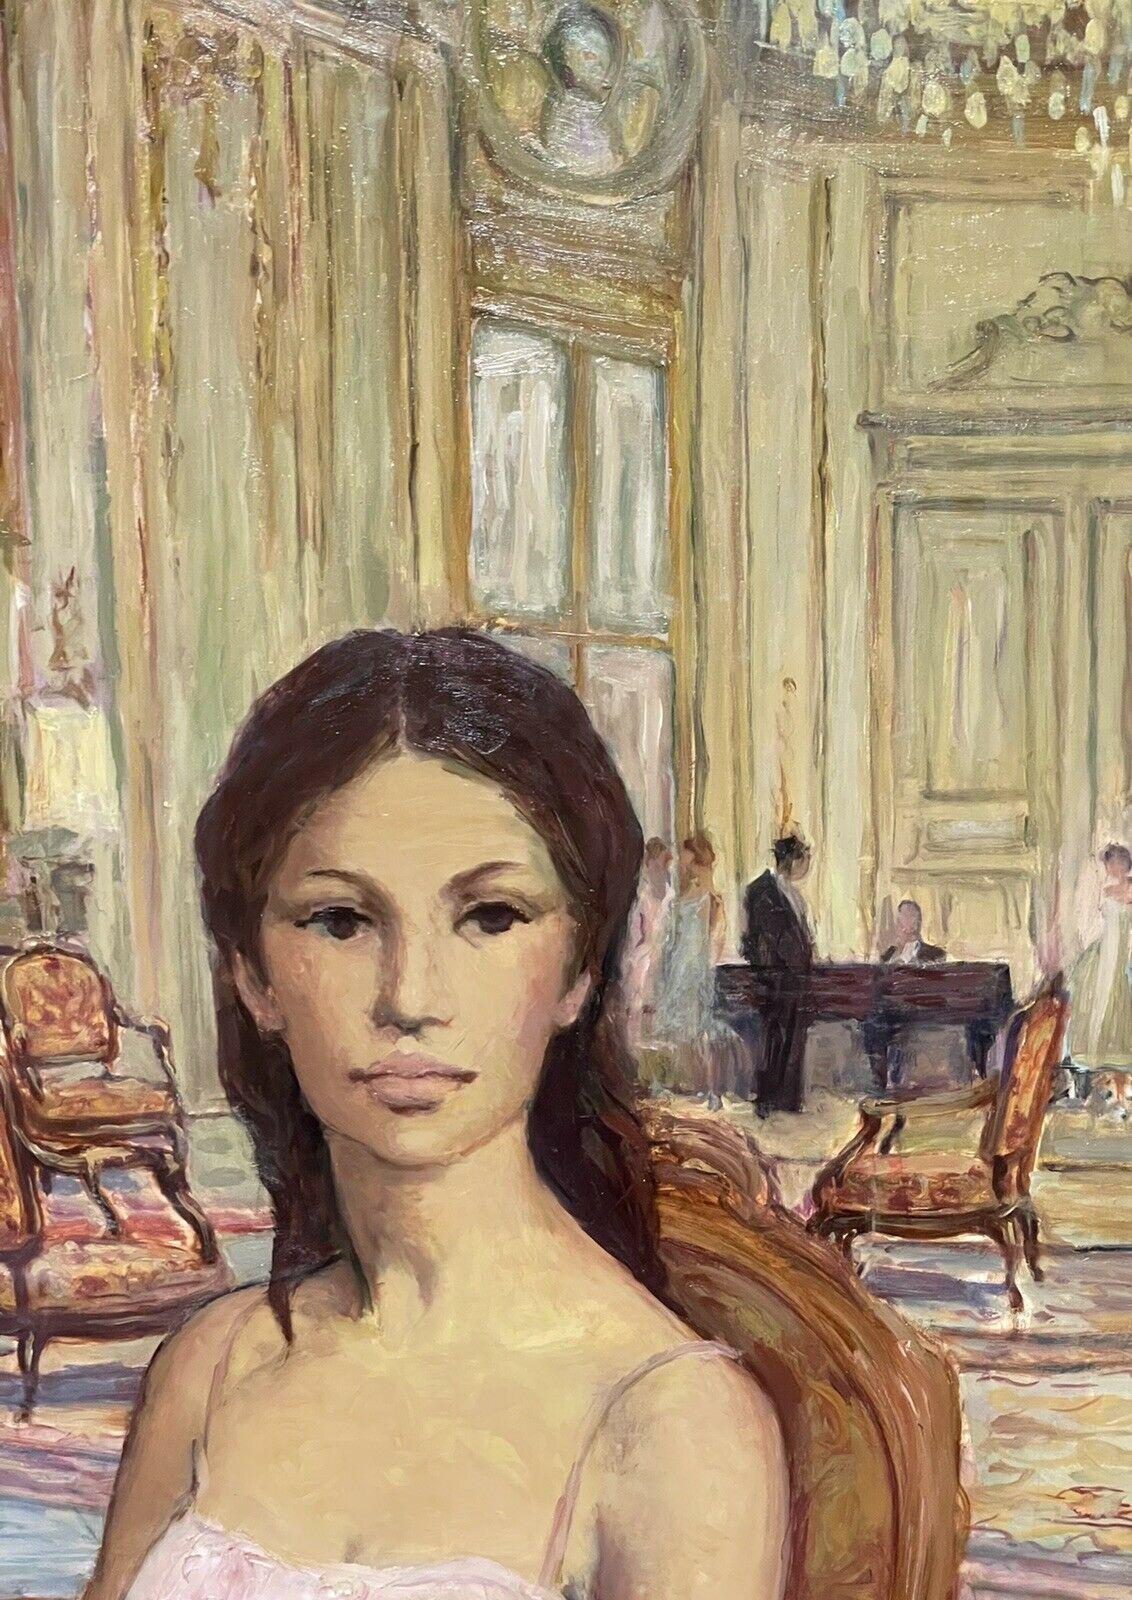 SIGNED FRENCH OIL - LADY SEATED IN LE MEURICE HOTEL PARIS TEA SALON INTERIOR - Post-Impressionist Painting by French signed